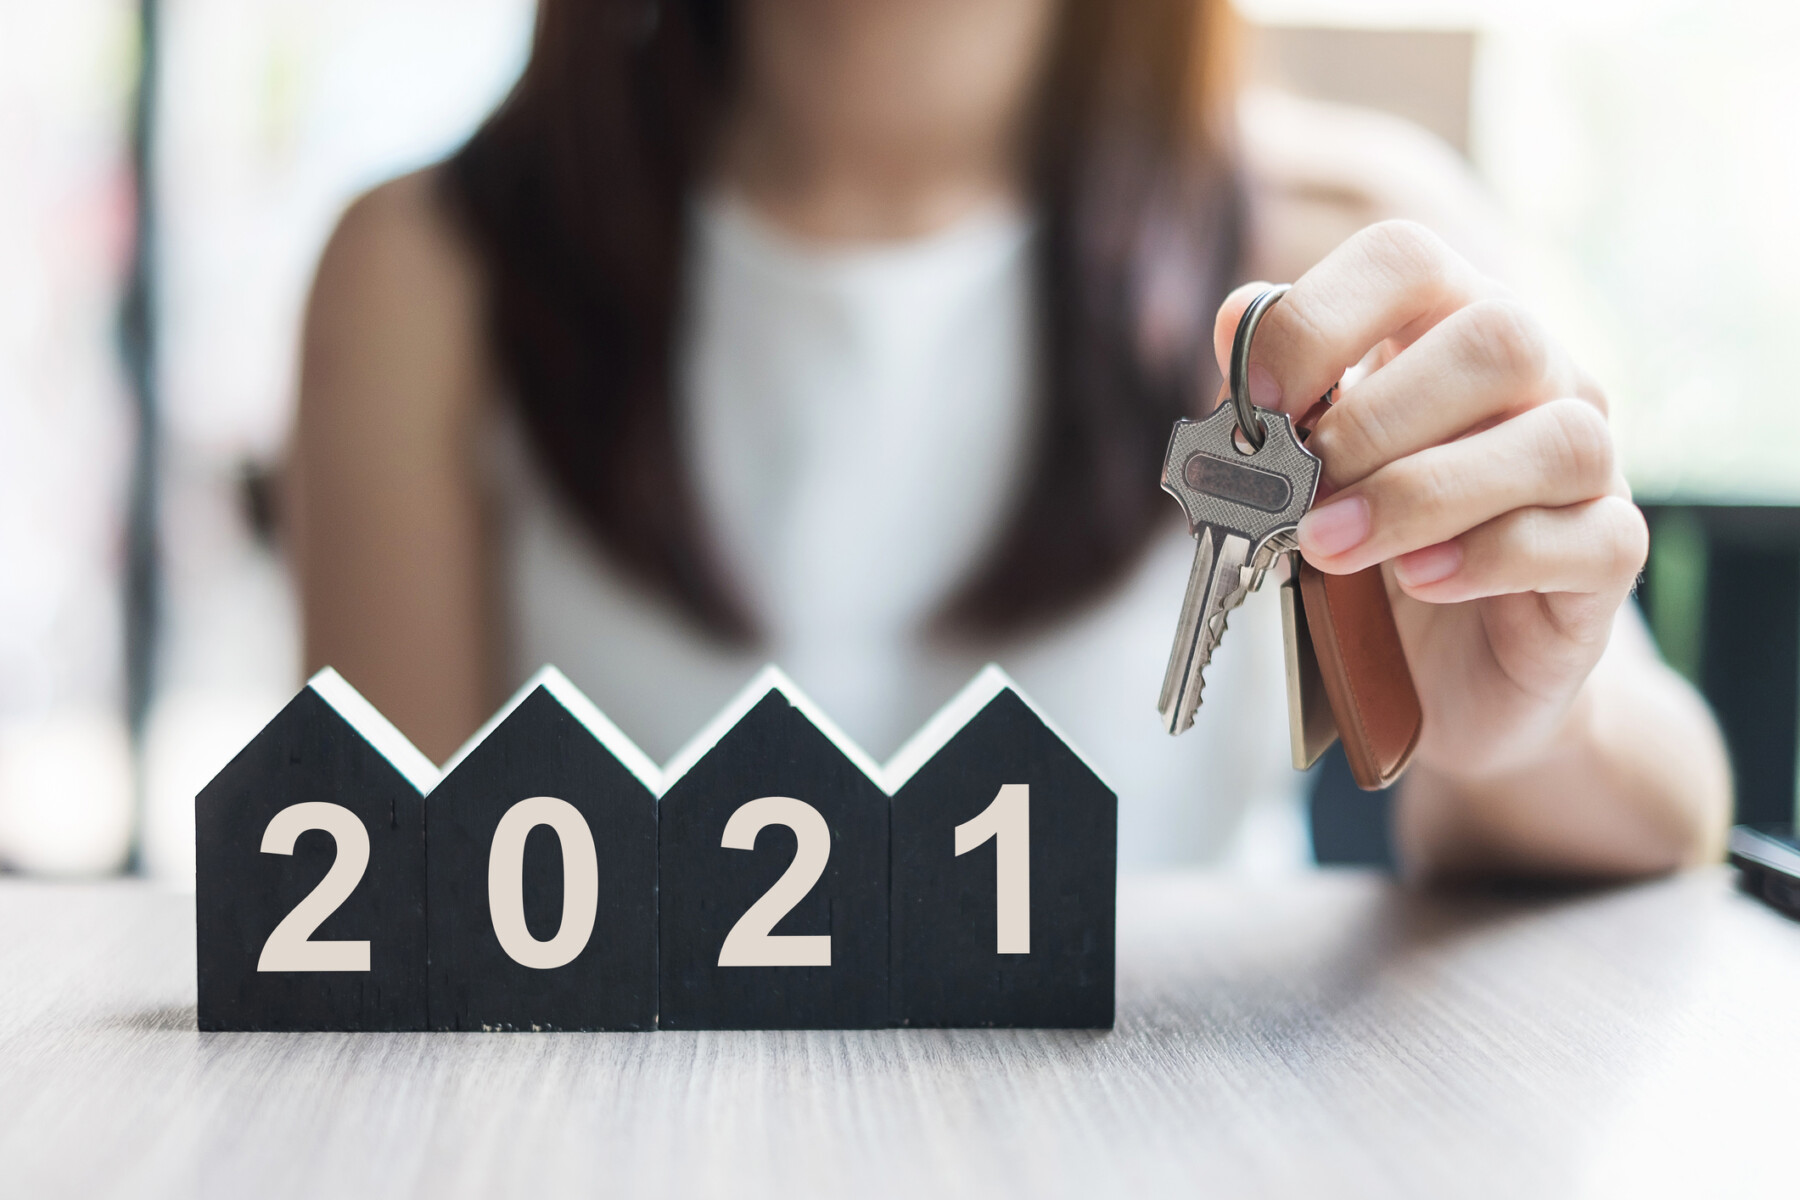 Long Island Housing Predictions for the Second Half of 2021